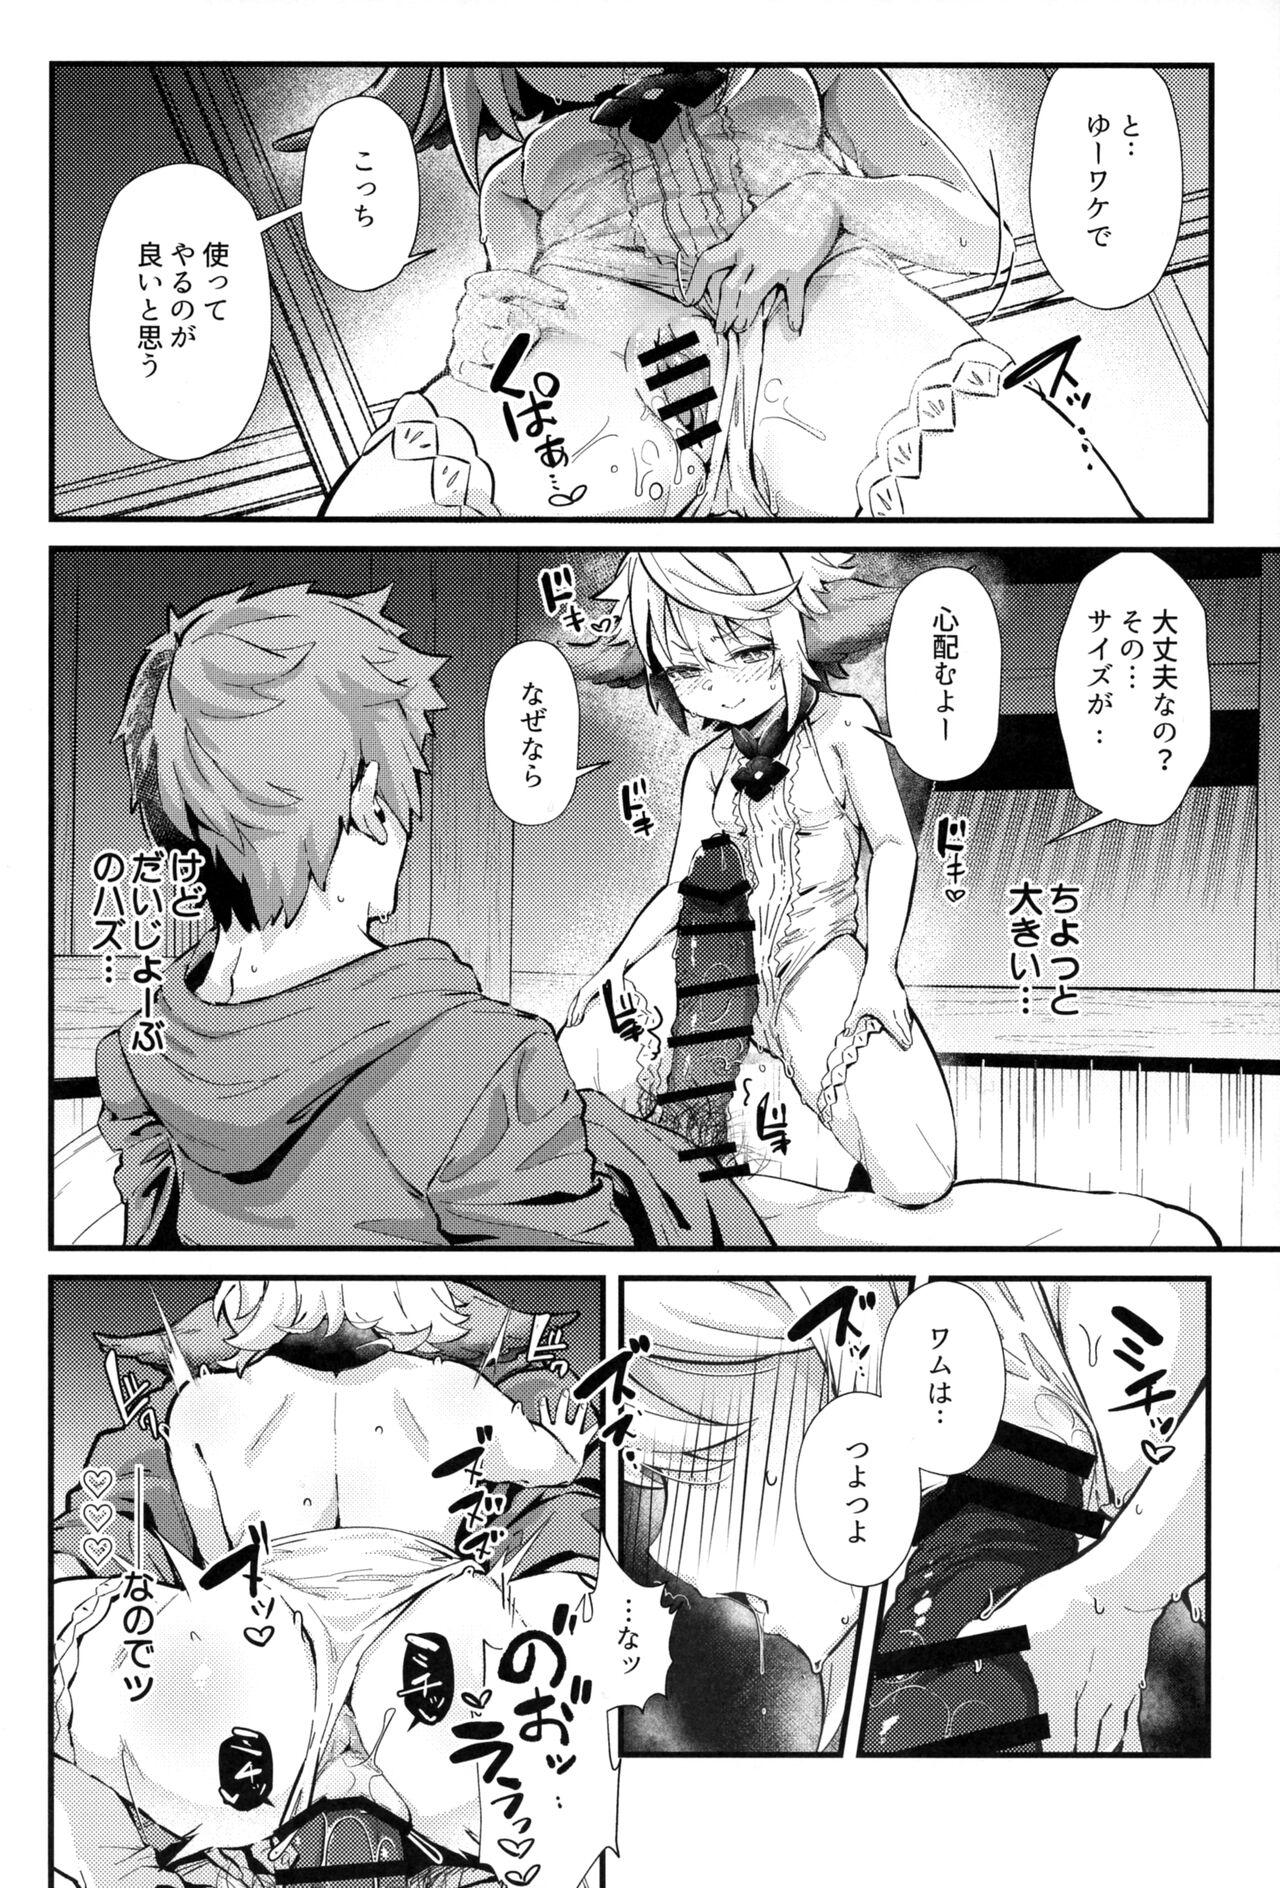 Missionary Position Porn 六竜灯儀・碧 - Granblue fantasy Gay - Page 7